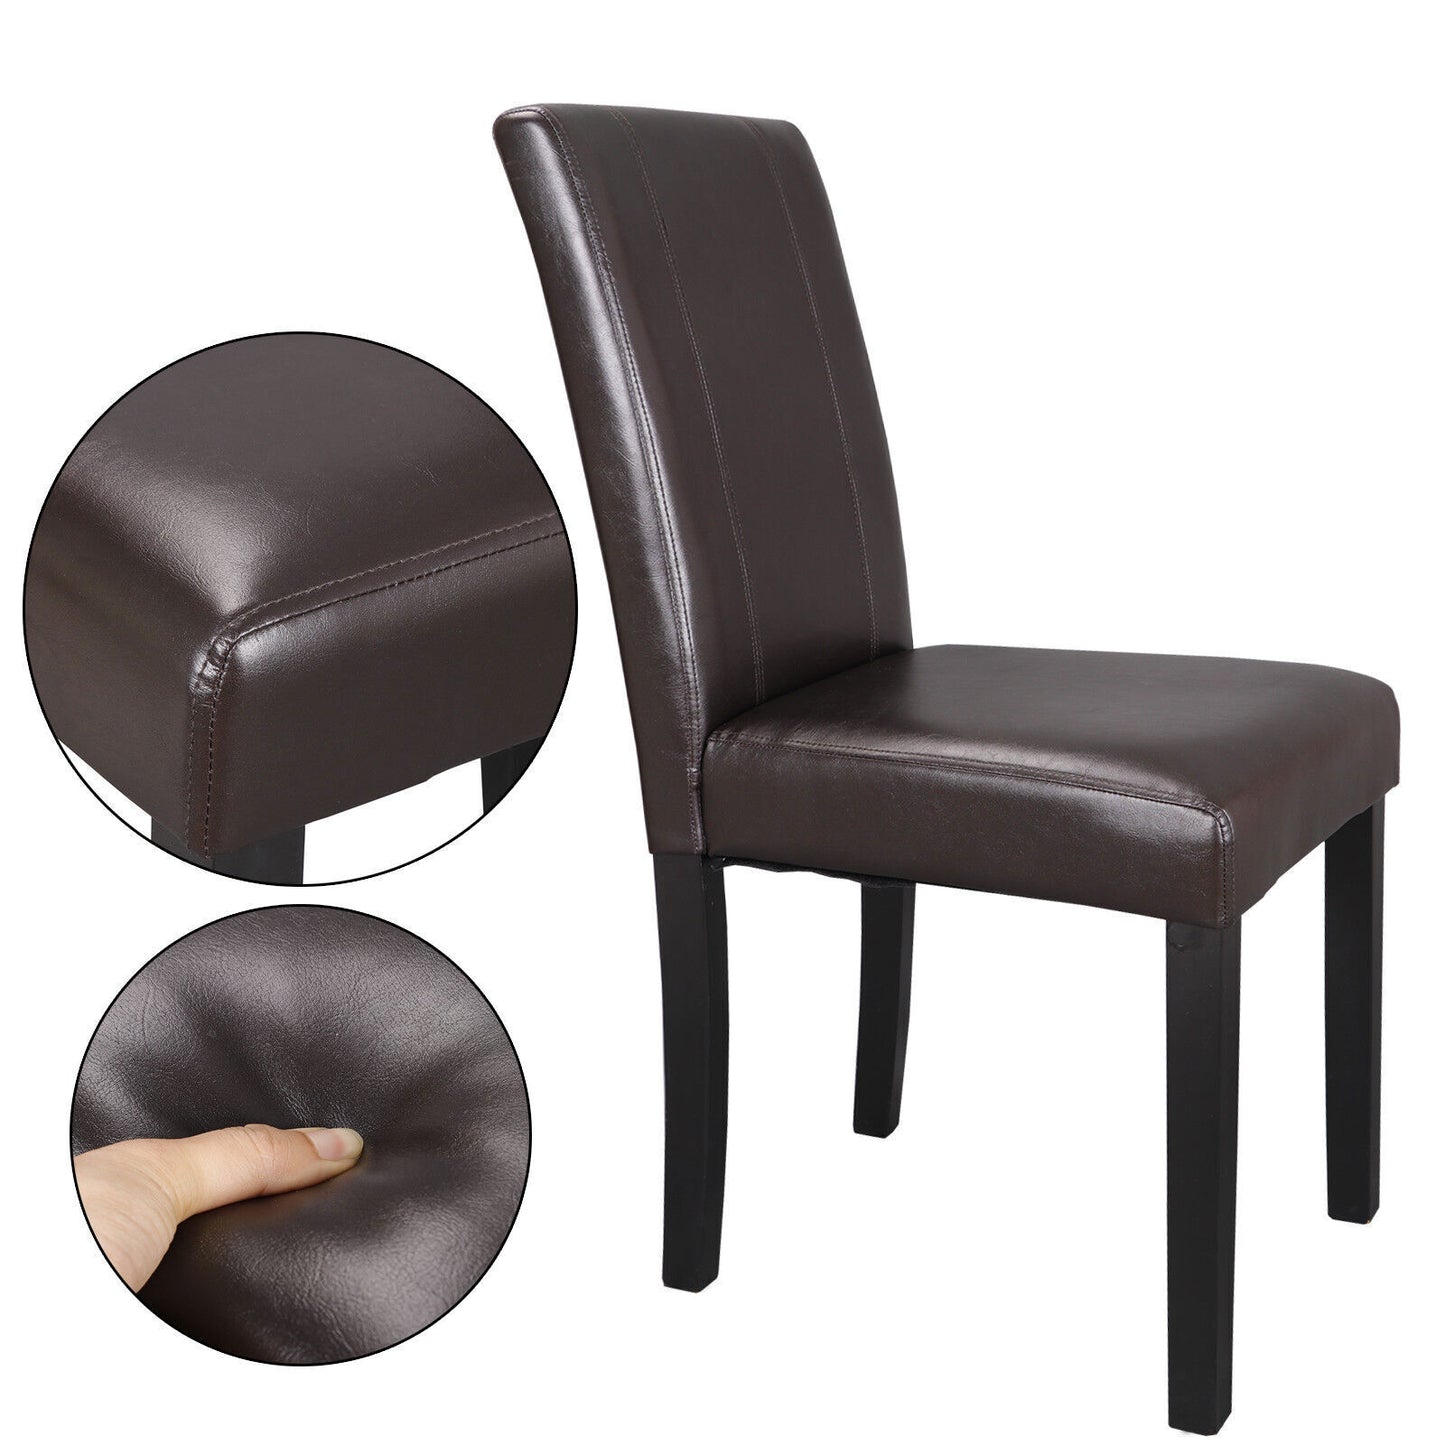 2 Set of Dining Chairs Simple Style Urban Leather Dining Parson Seats Brown